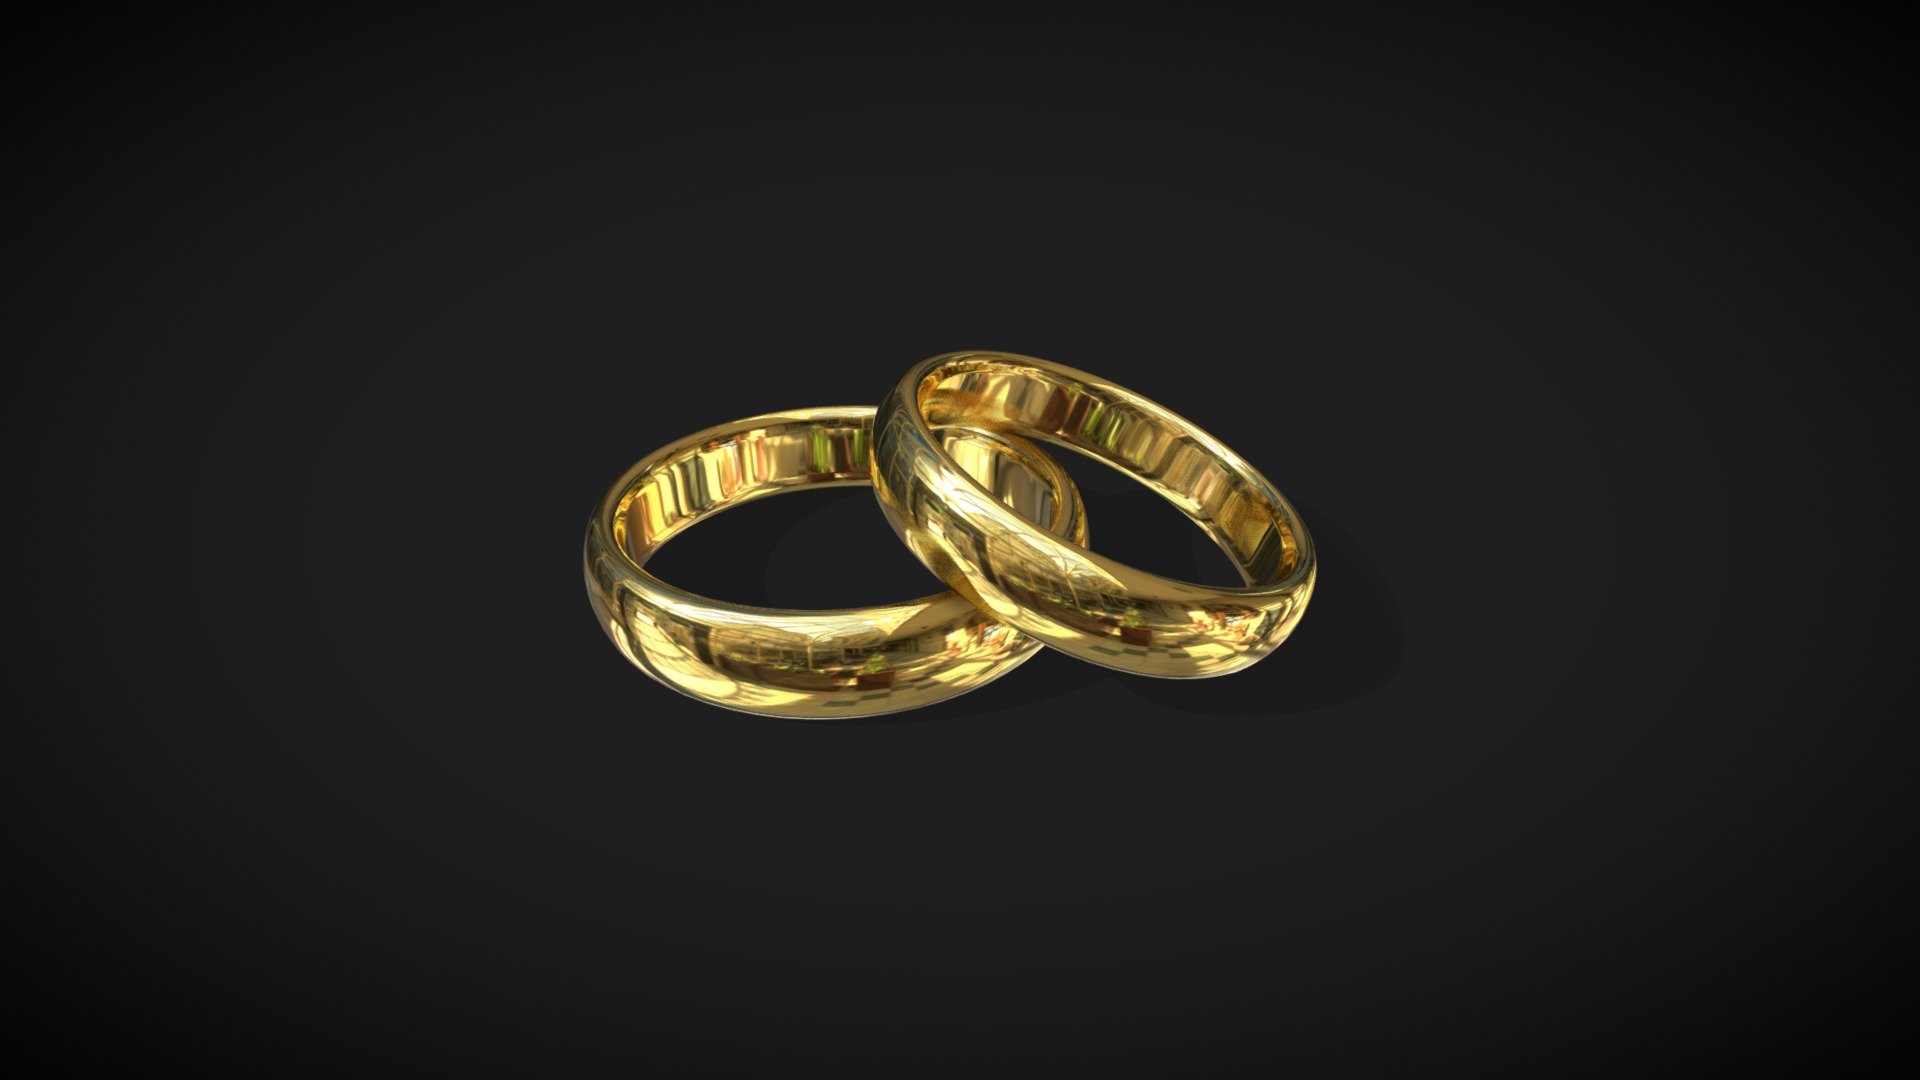 Fairly low poly to look pretty smooth. Textured in 4k res. Two separatable elements (big and small ring) 3d model